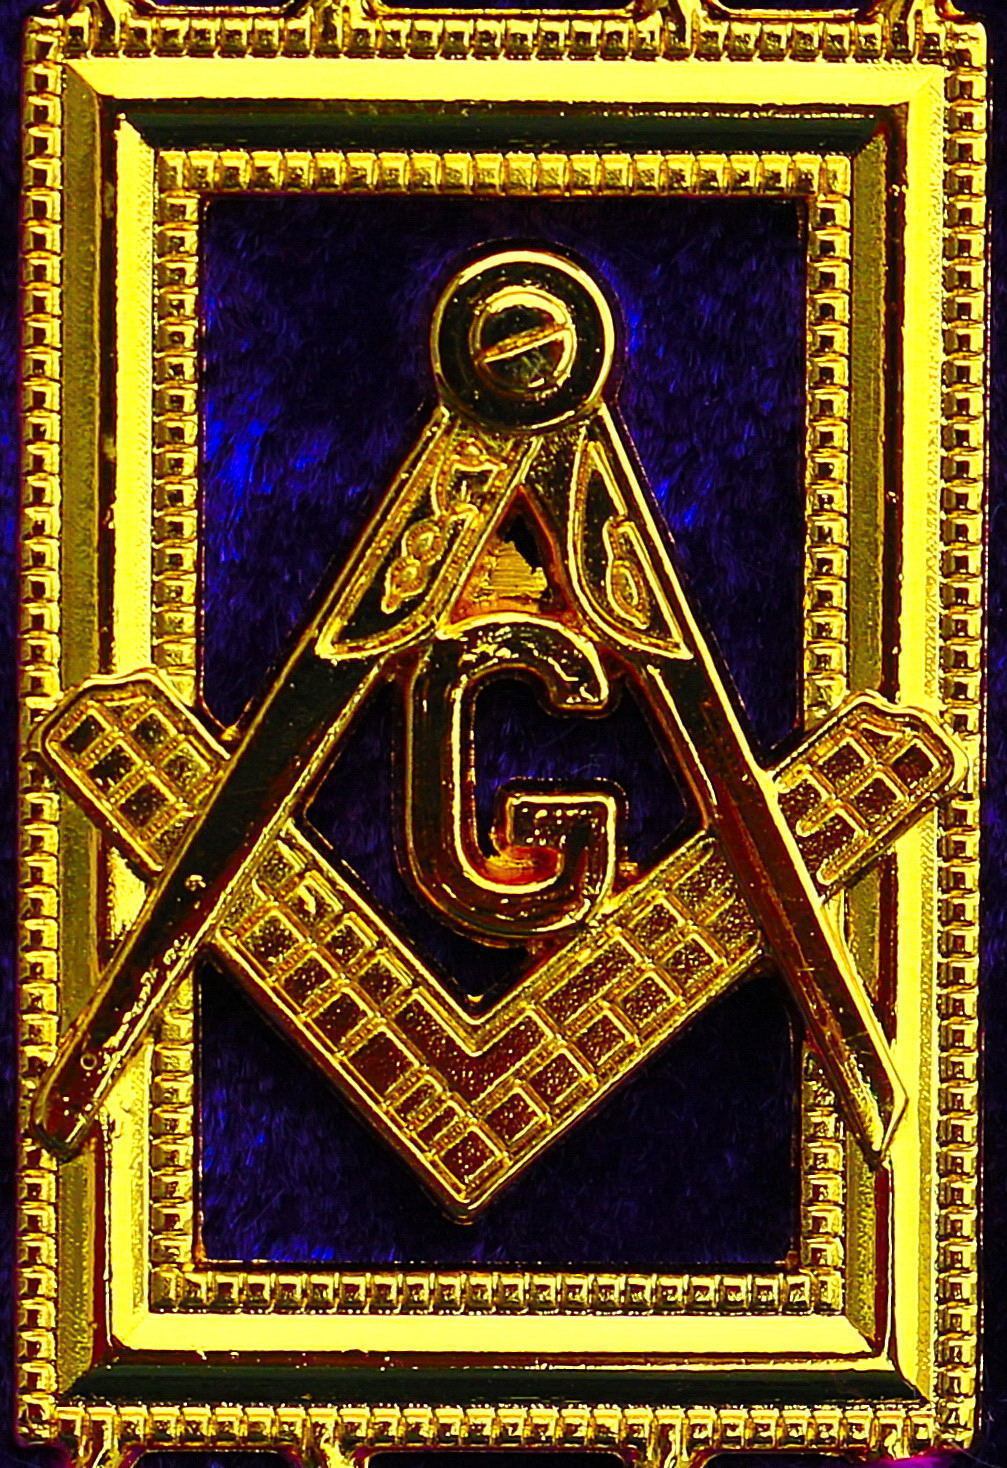 Grand Officers Blue Lodge Chain Collar - Gold Plated with Rhinestones on Red Velvet - Bricks Masons